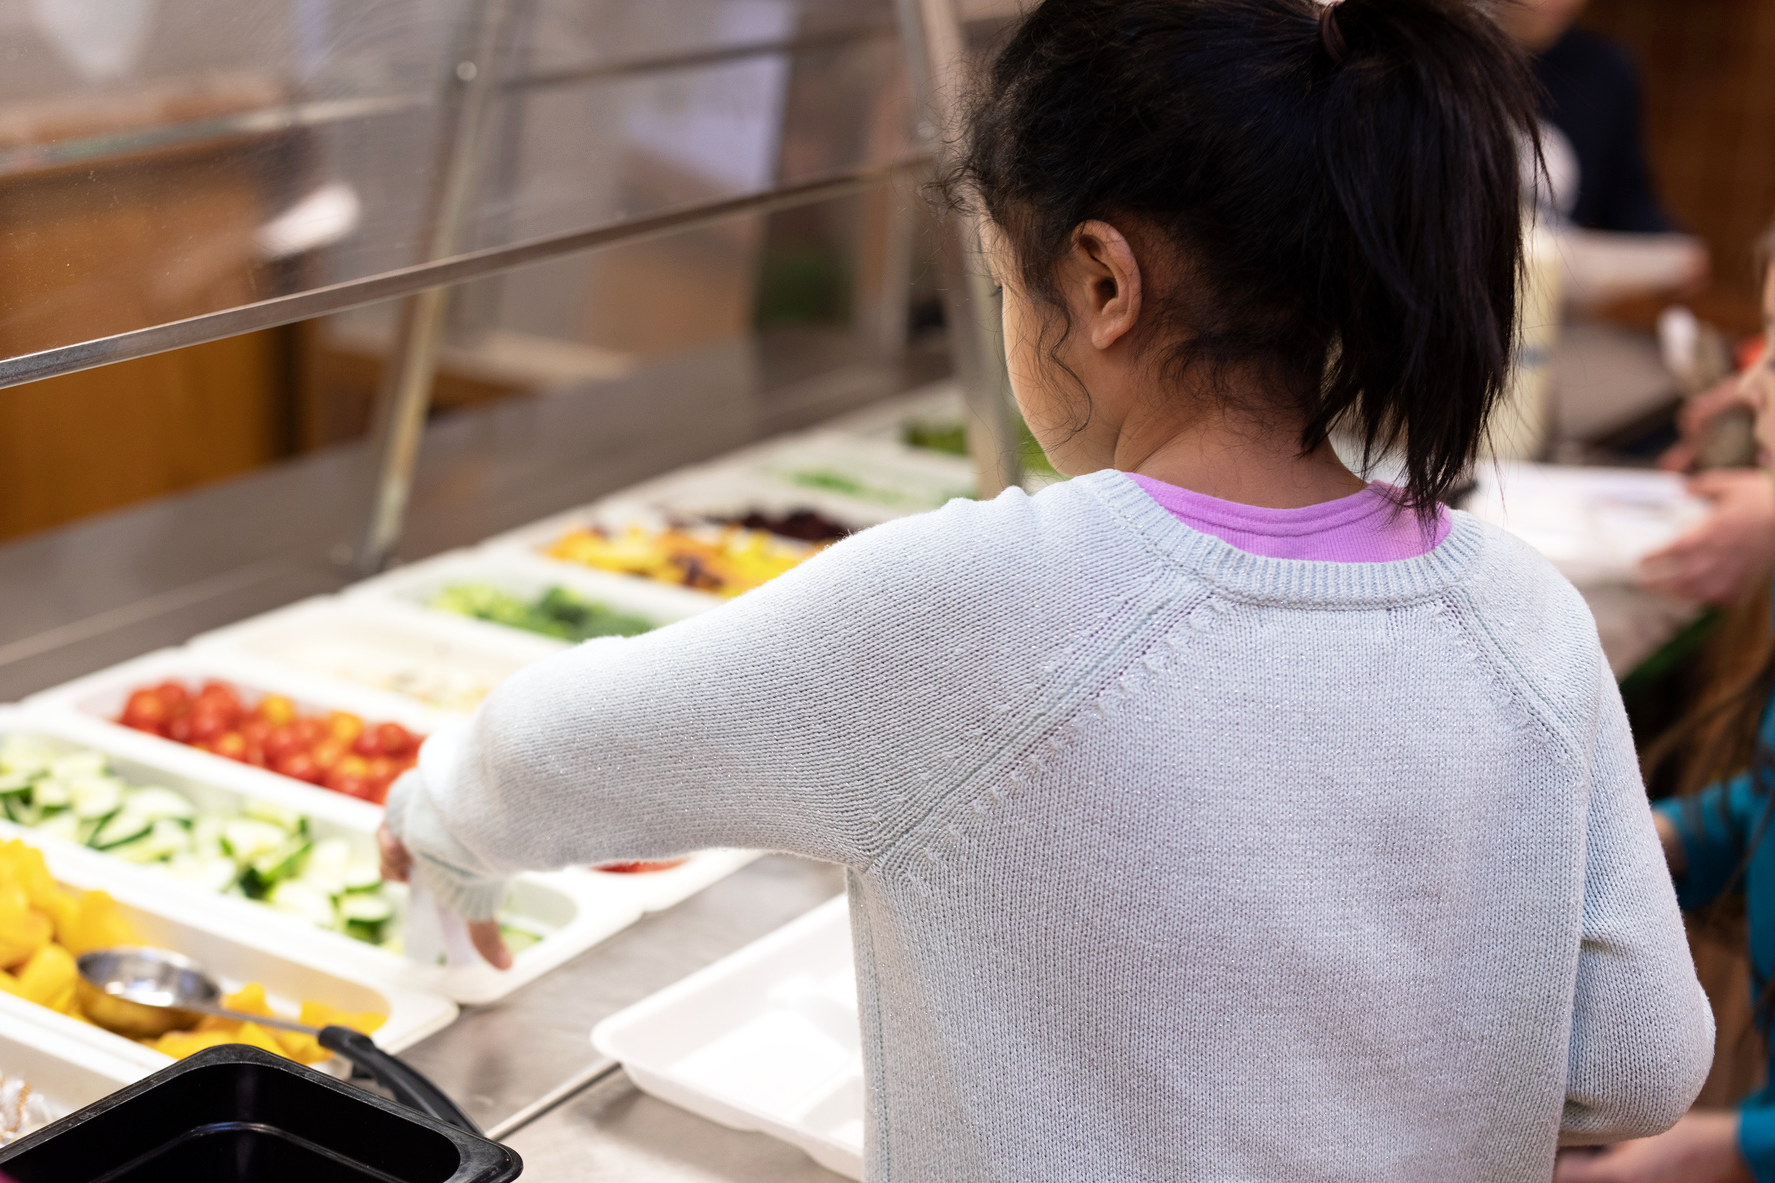 Student selects Michigan-grown fruits and vegetables during school lunch